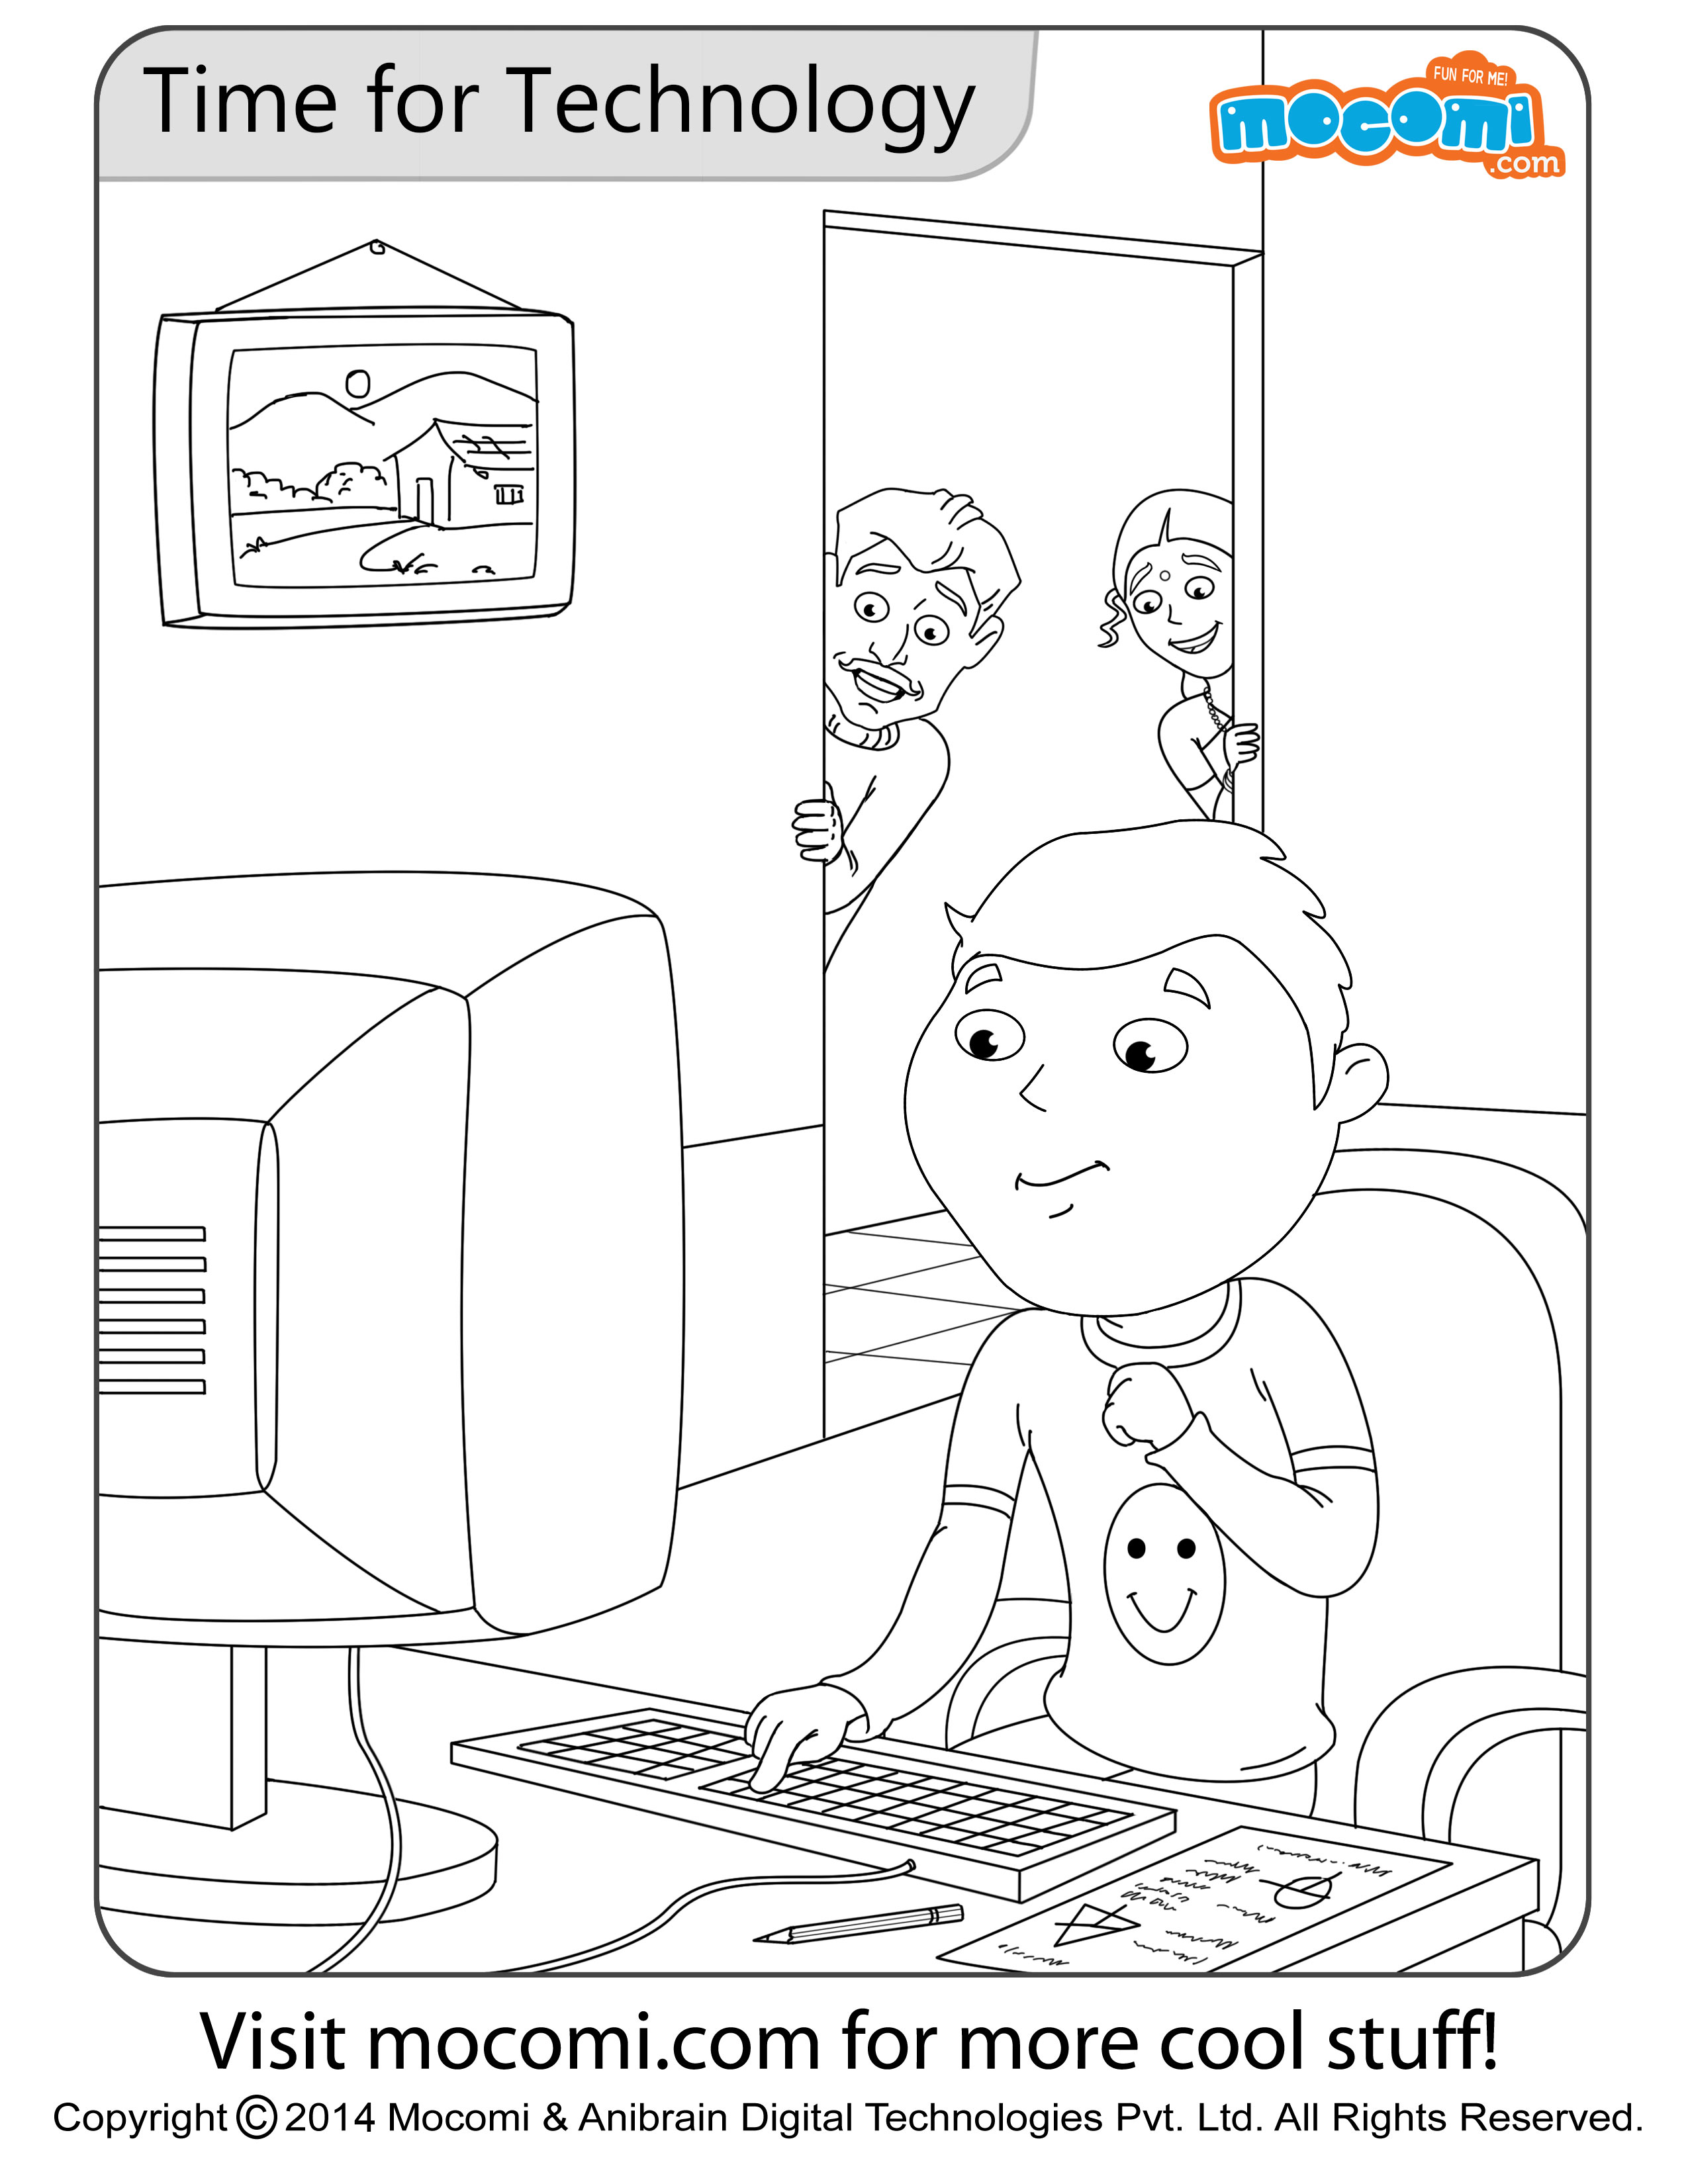 Time for technology colouring page